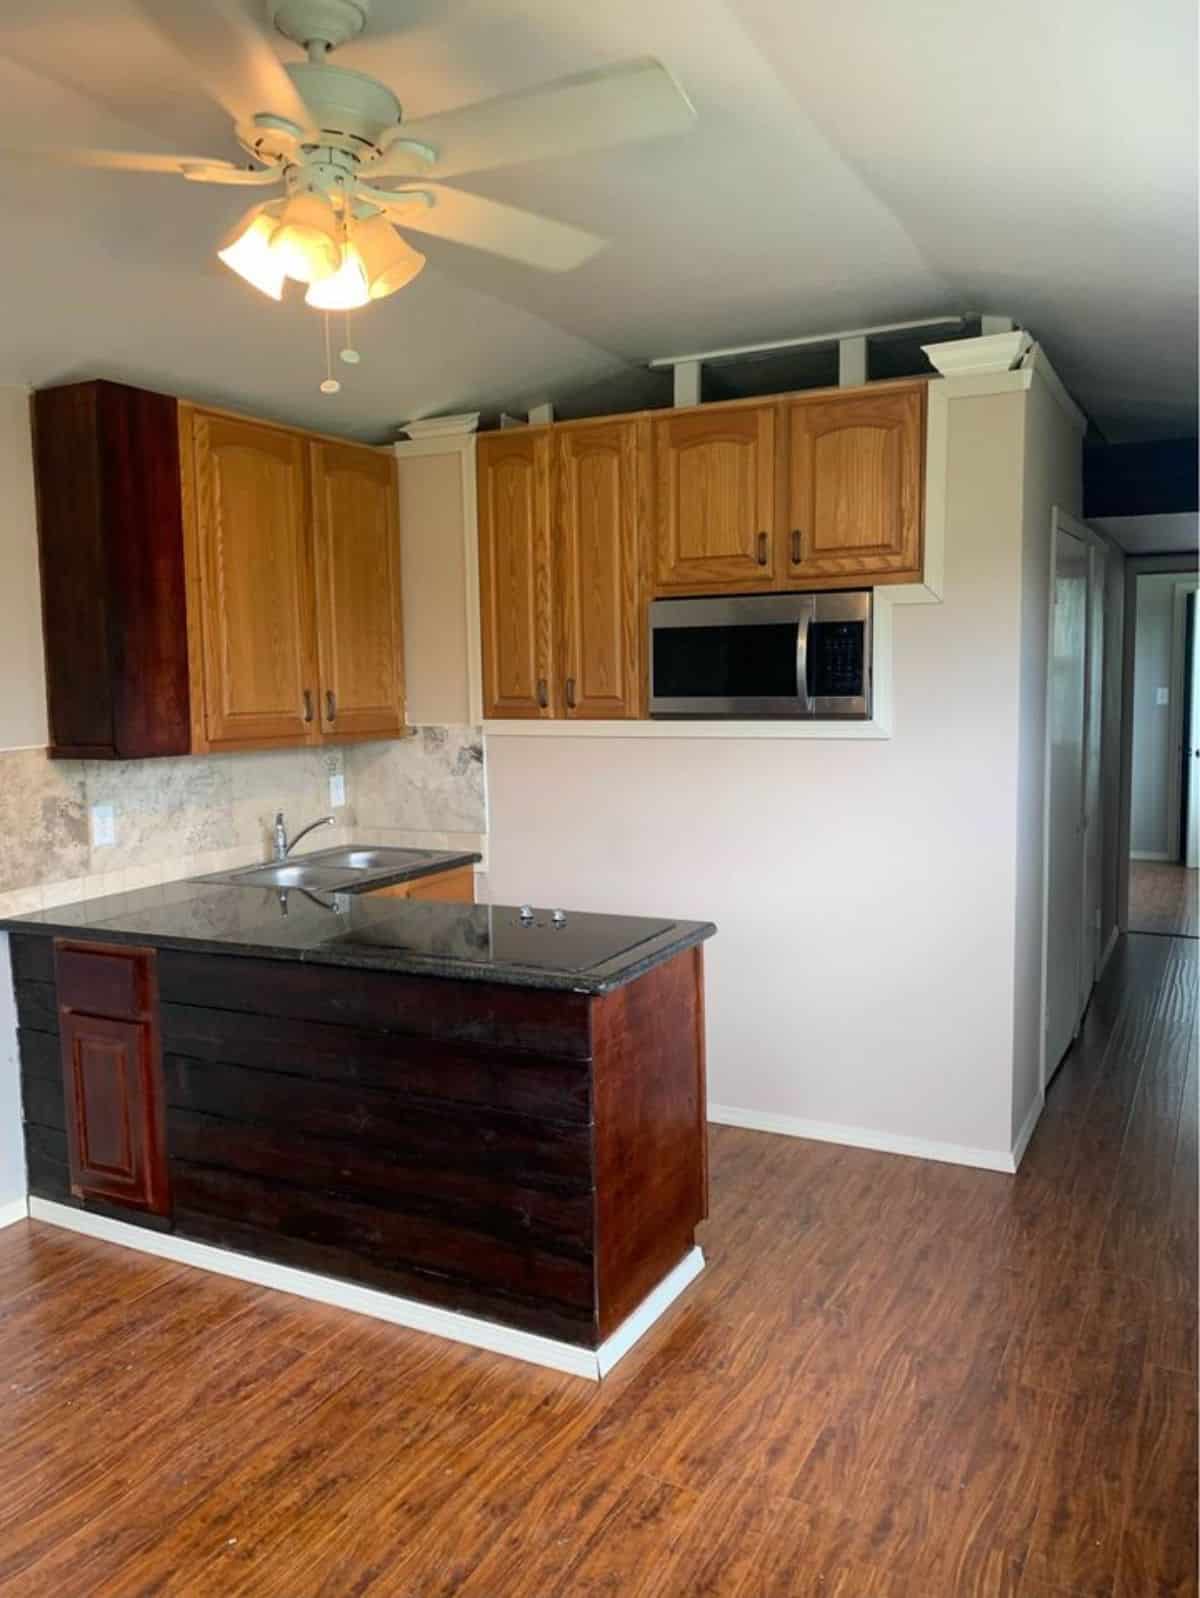 L shaped kitchen countertop in kitchen area with all the appliances and storage cabinets